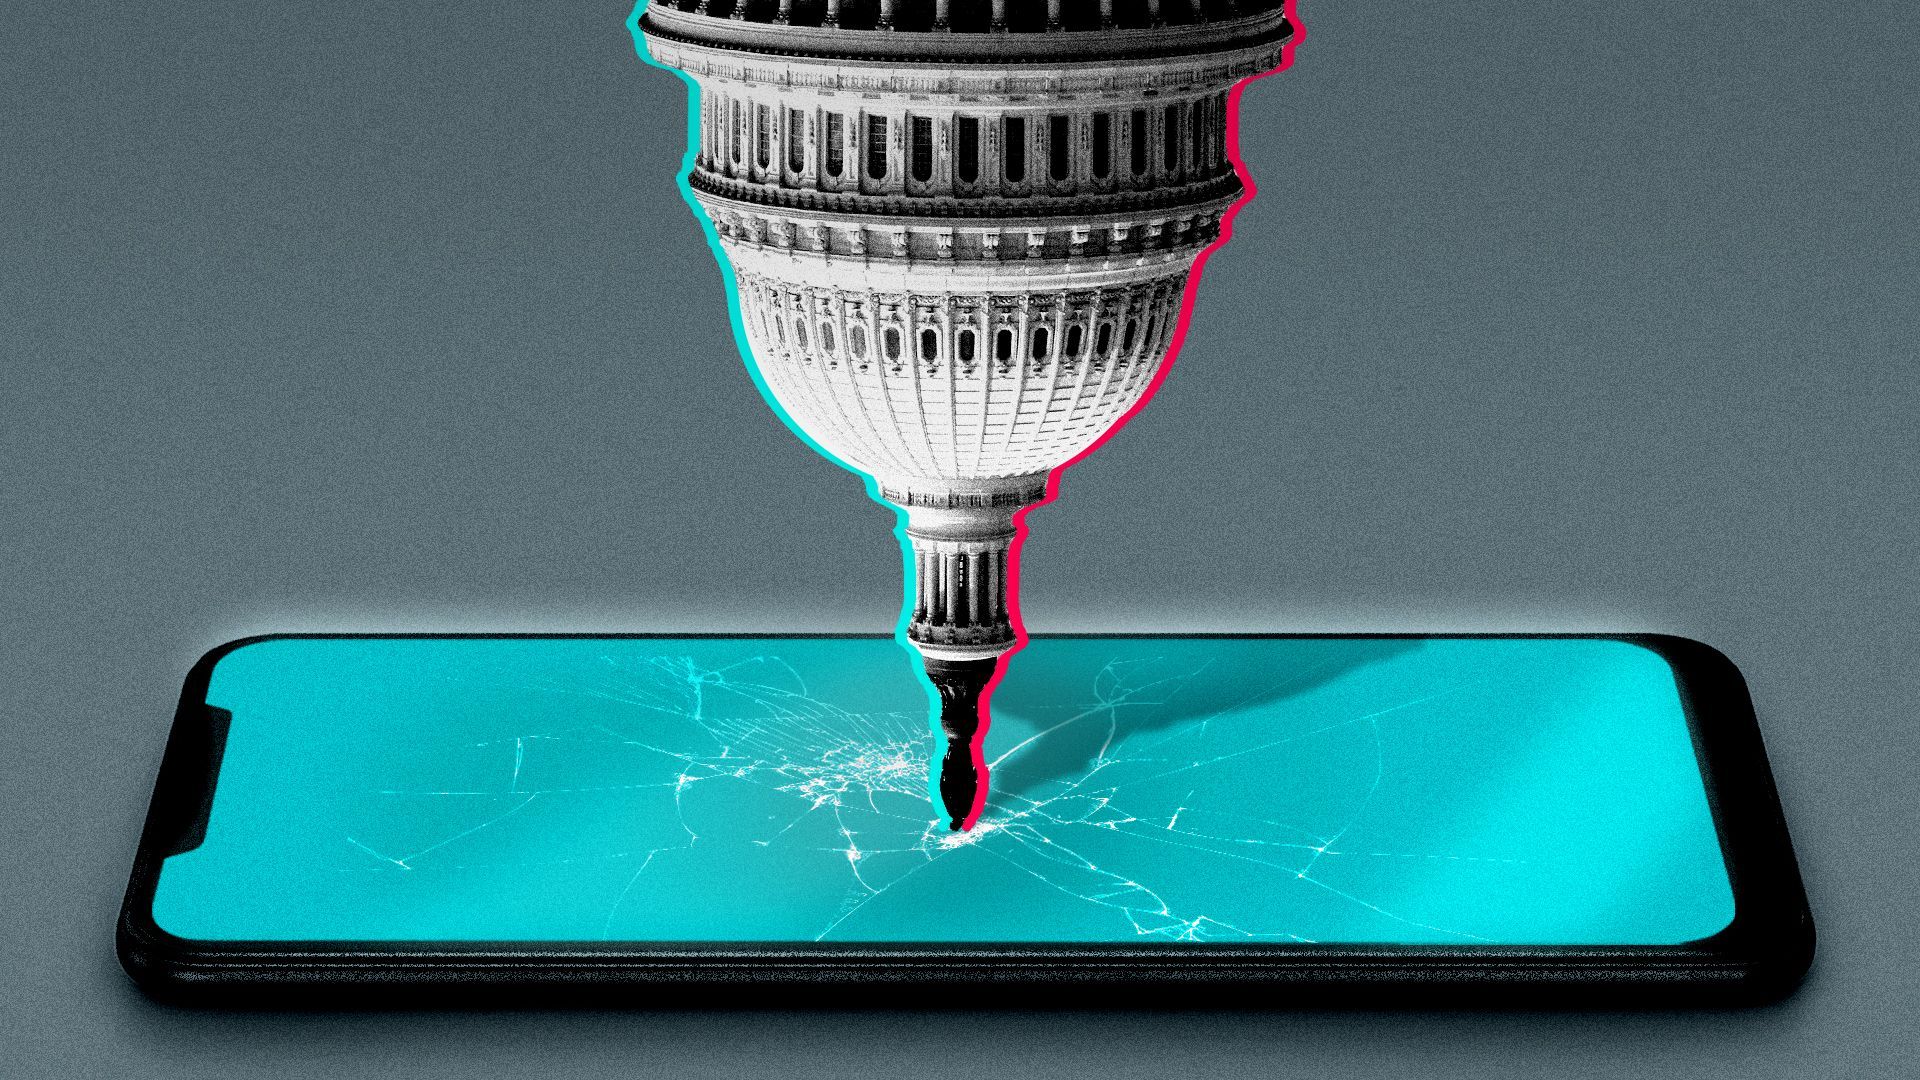 Illustration of the US Capitol dome piercing a smart phone. The Capitol has pink and blue strokes in the colors and style of TikTok's logo.